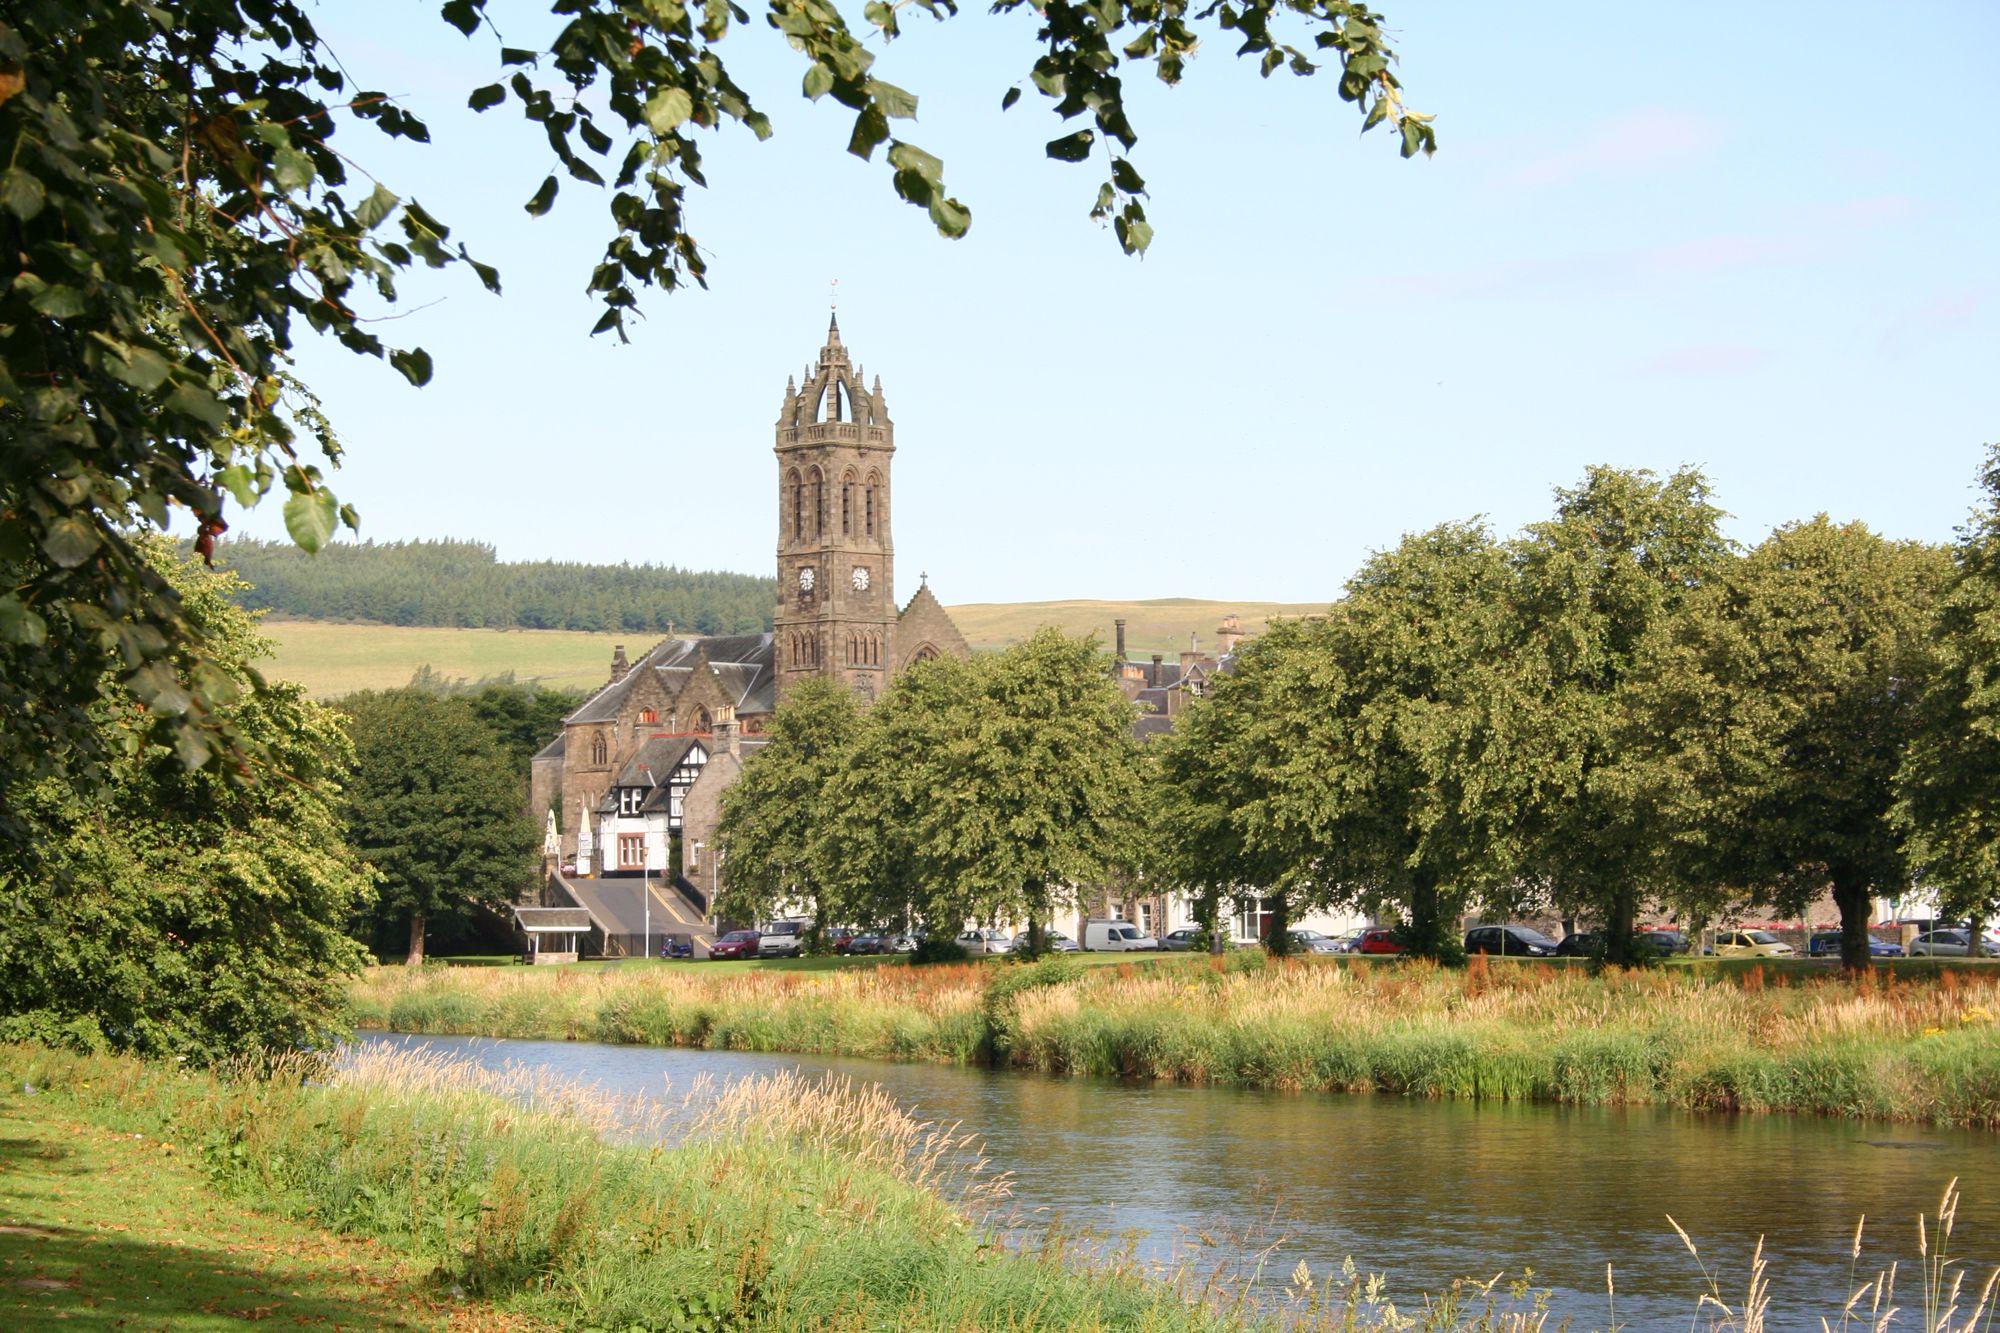 Hotels, Cottages, B&Bs & Glamping in the Scottish Borders